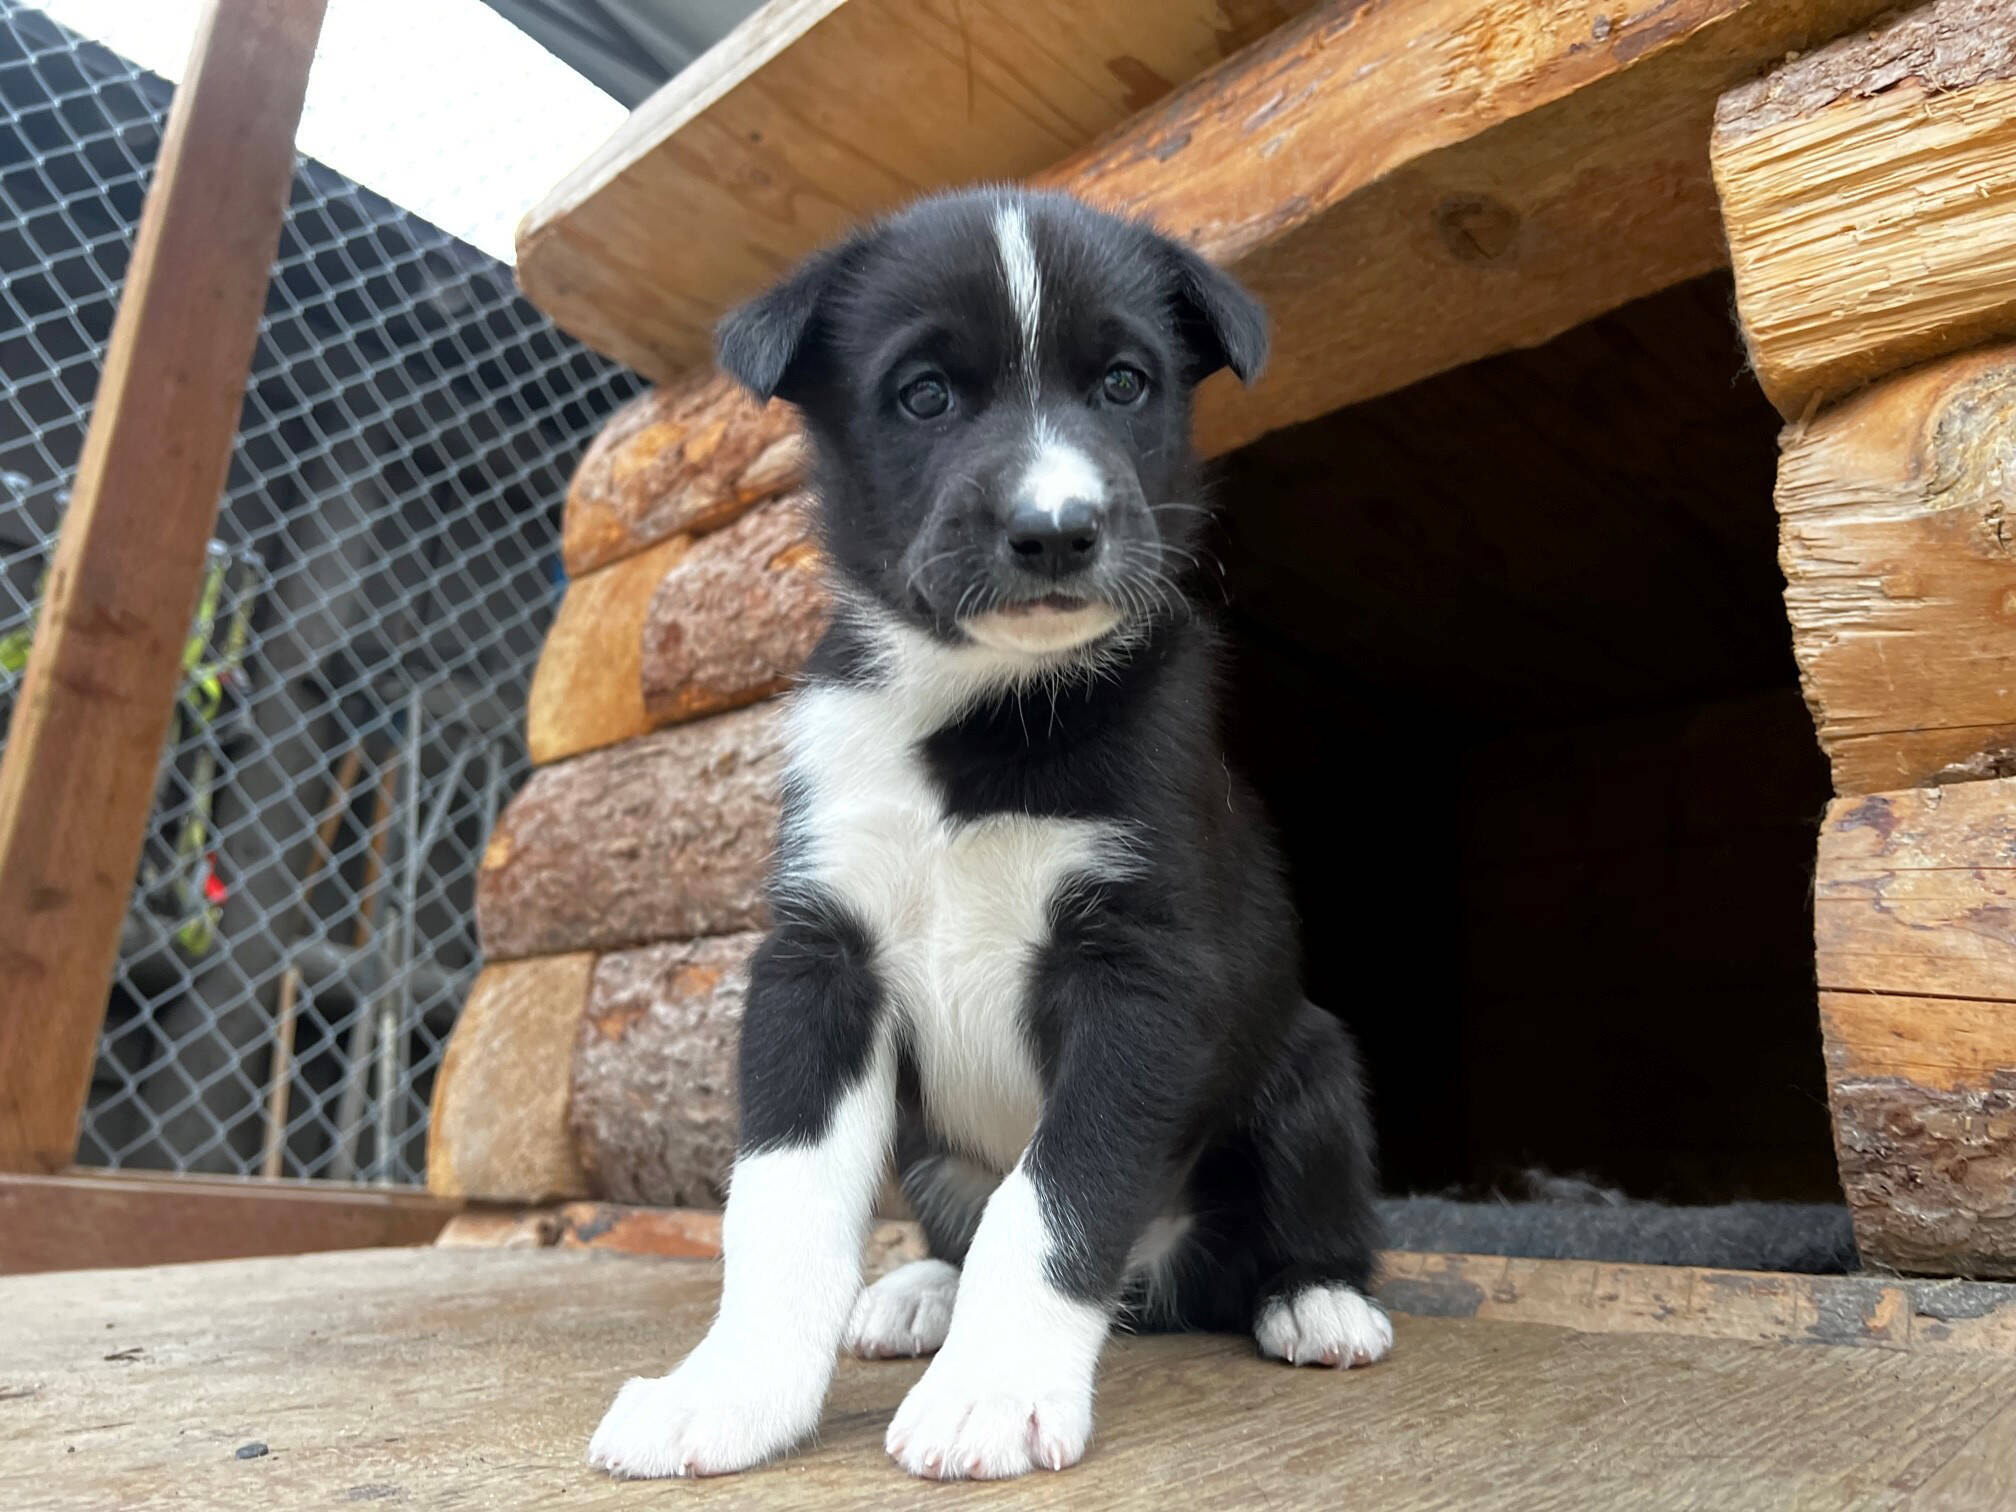 Mike the puppy is seen at Denali National Park and Preserve. (Photo courtesy National Park Service)